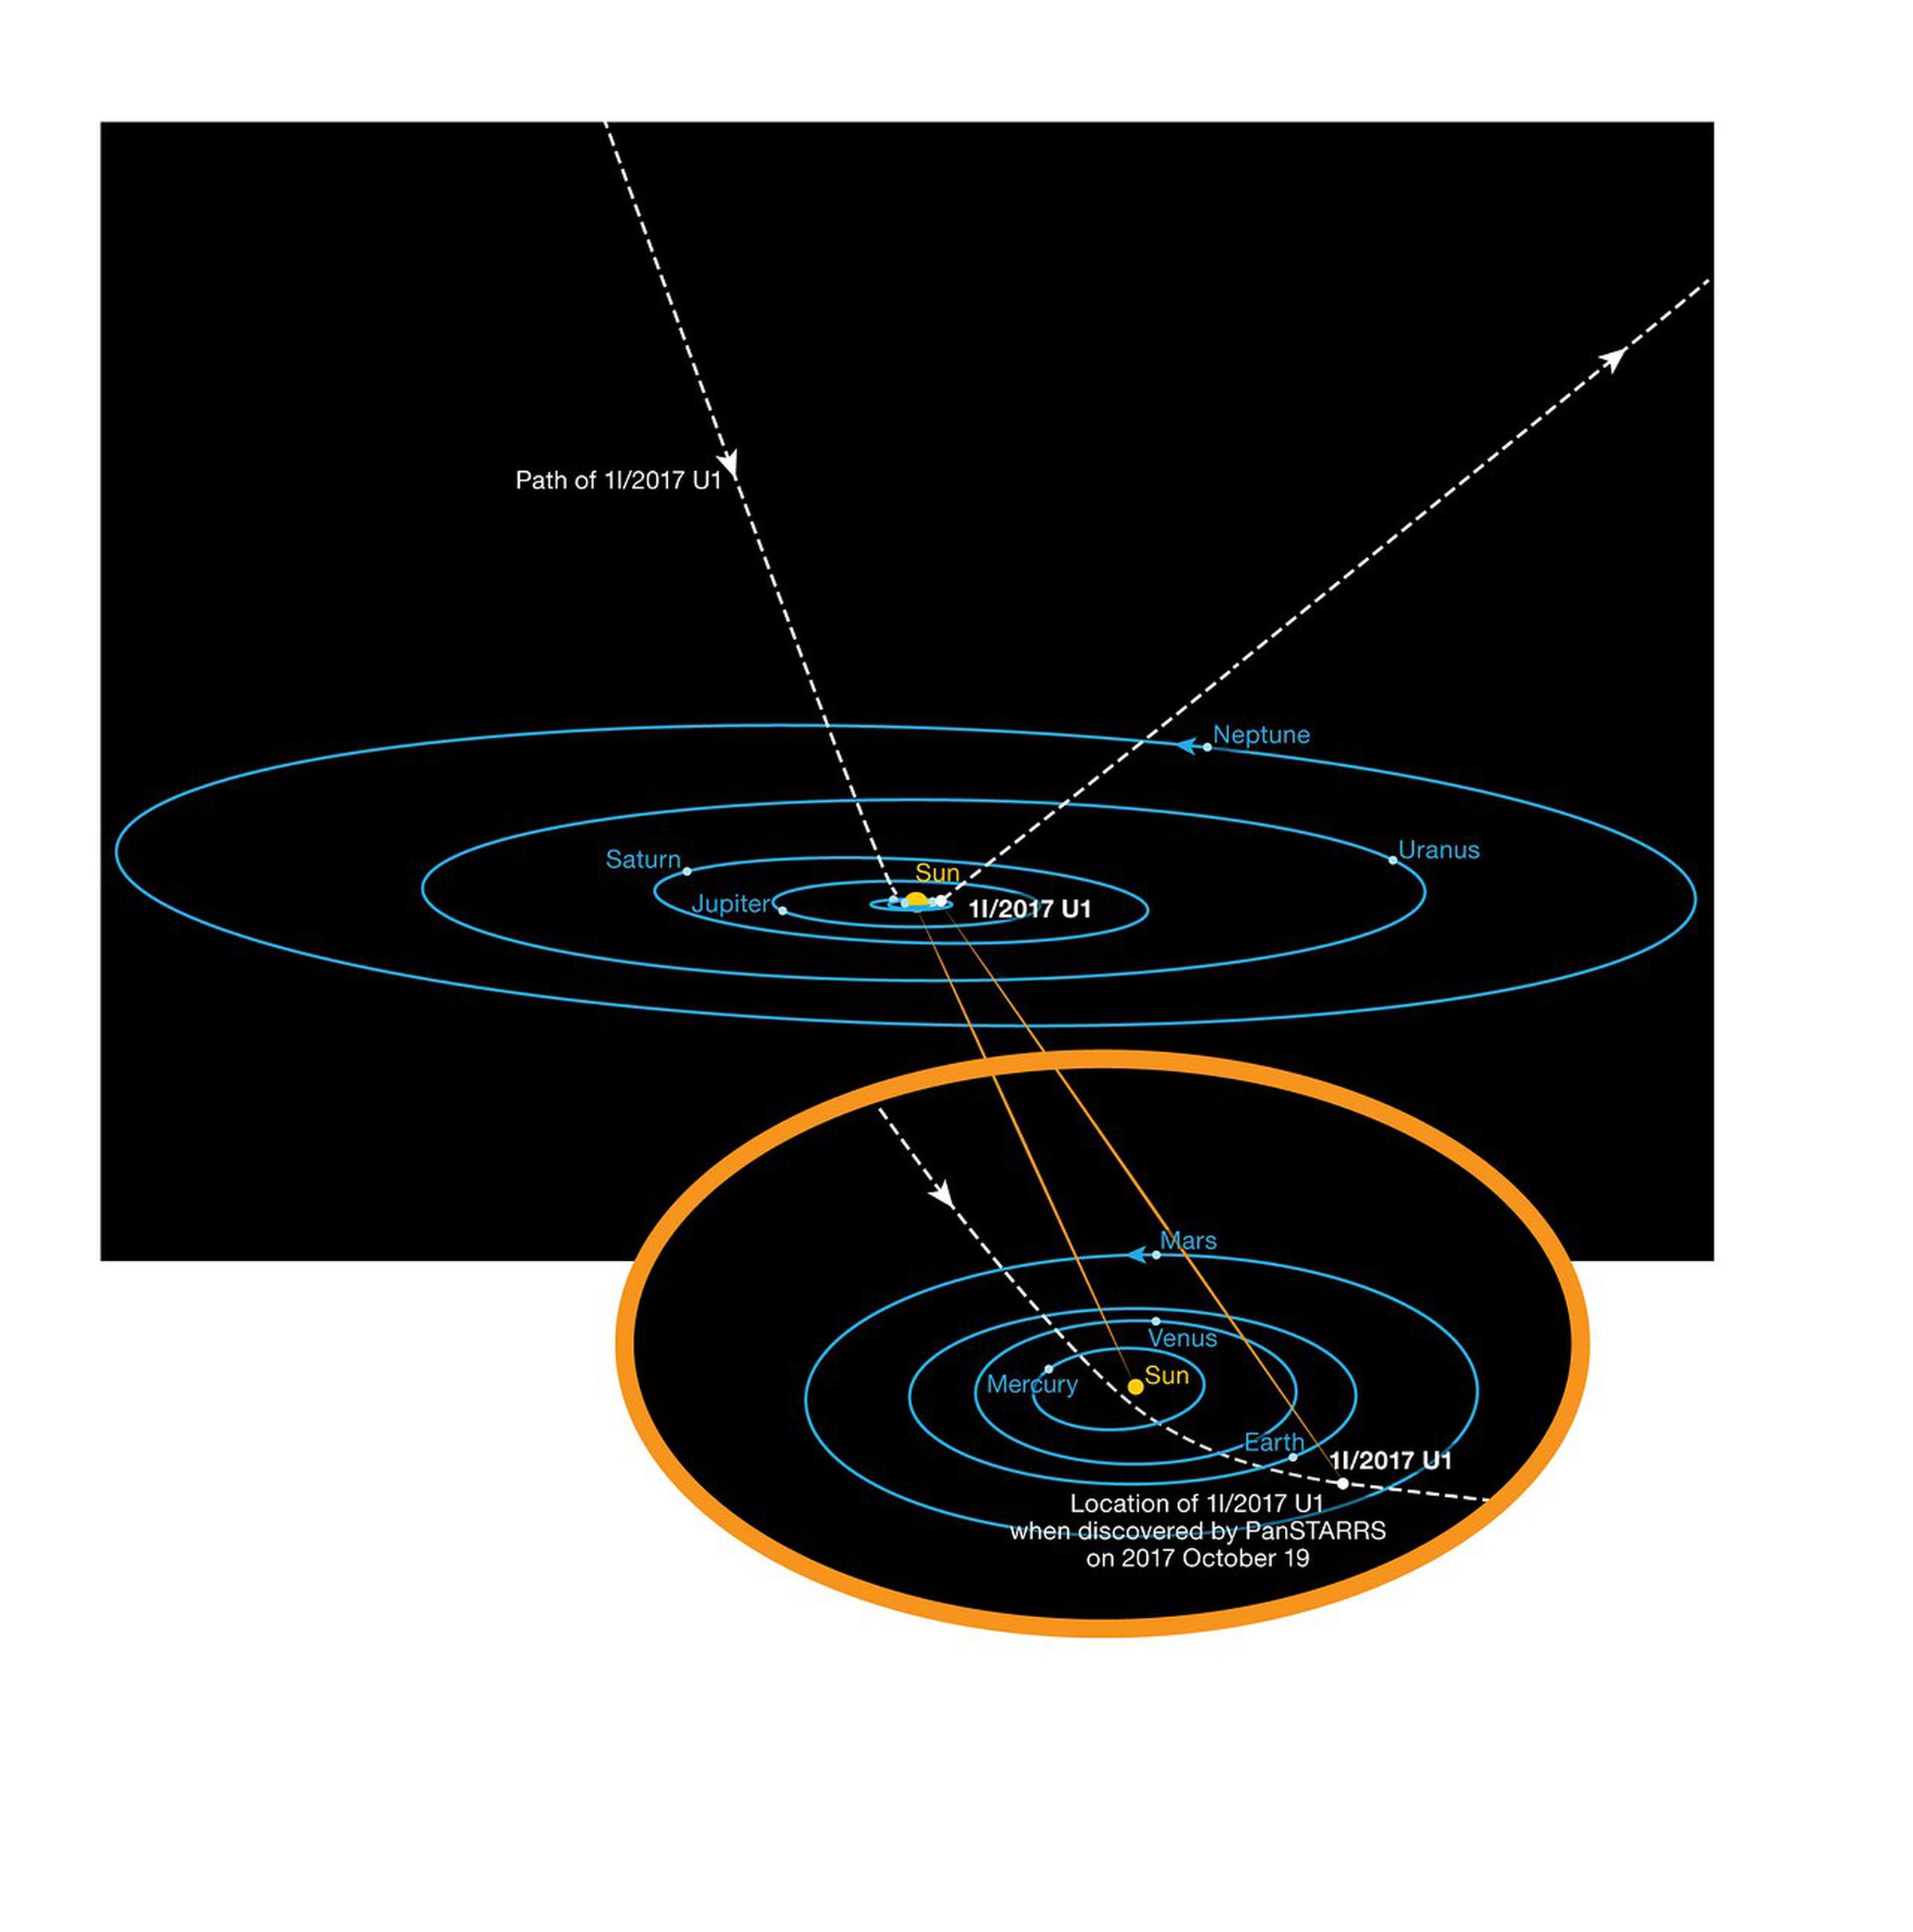 This diagram shows the orbit of the interstellar asteroid ‘Oumuamua as it passes through the Solar System. Unlike all other asteroids and comets observed before, this body is not bound by gravity to the Sun. It has come from interstellar space and will re